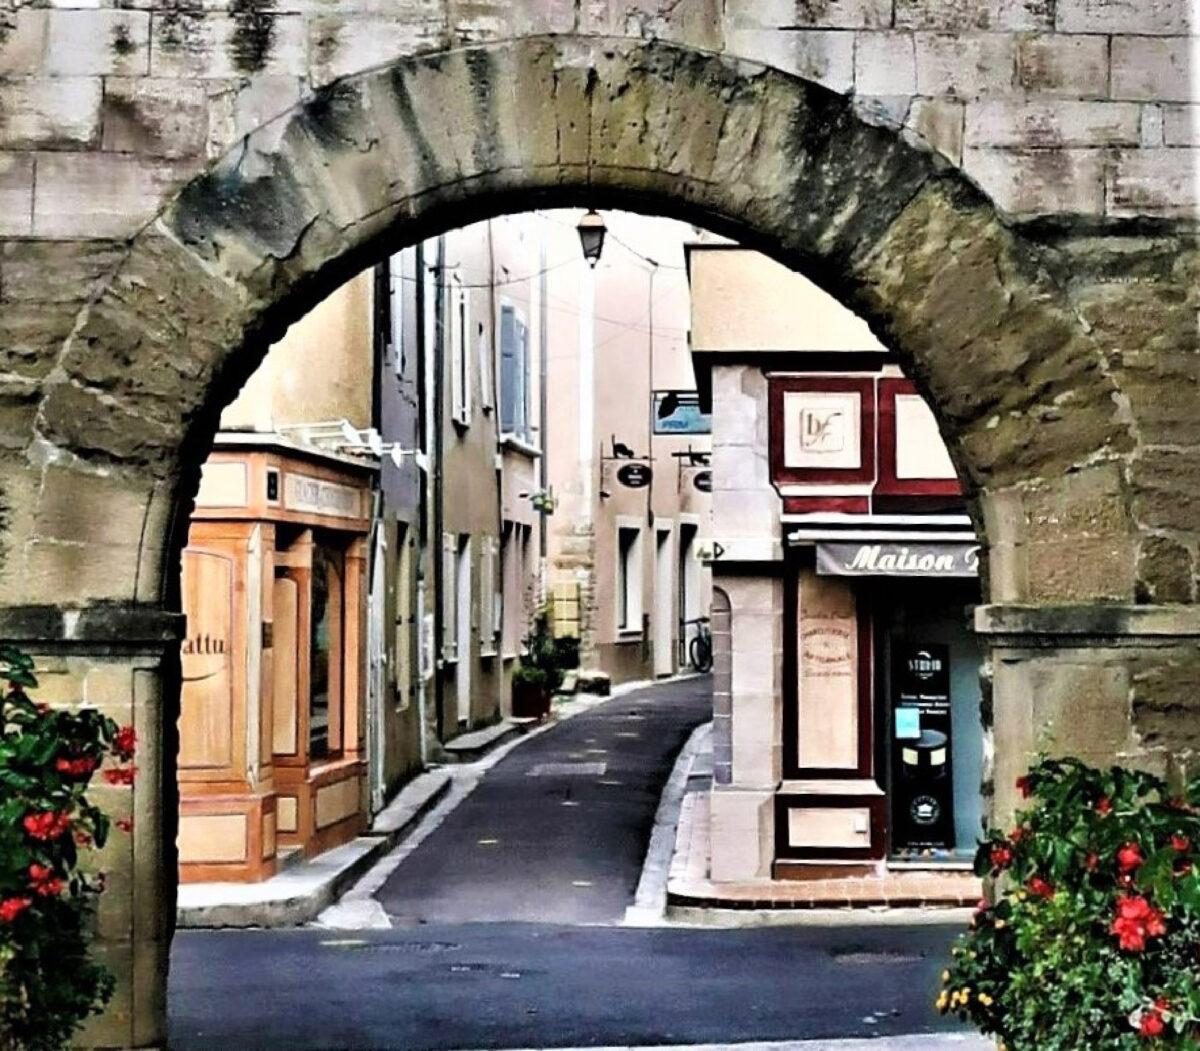 The village of Pernes-les-Fontaines, France, is entered through an arched gateway. (Victor Block)